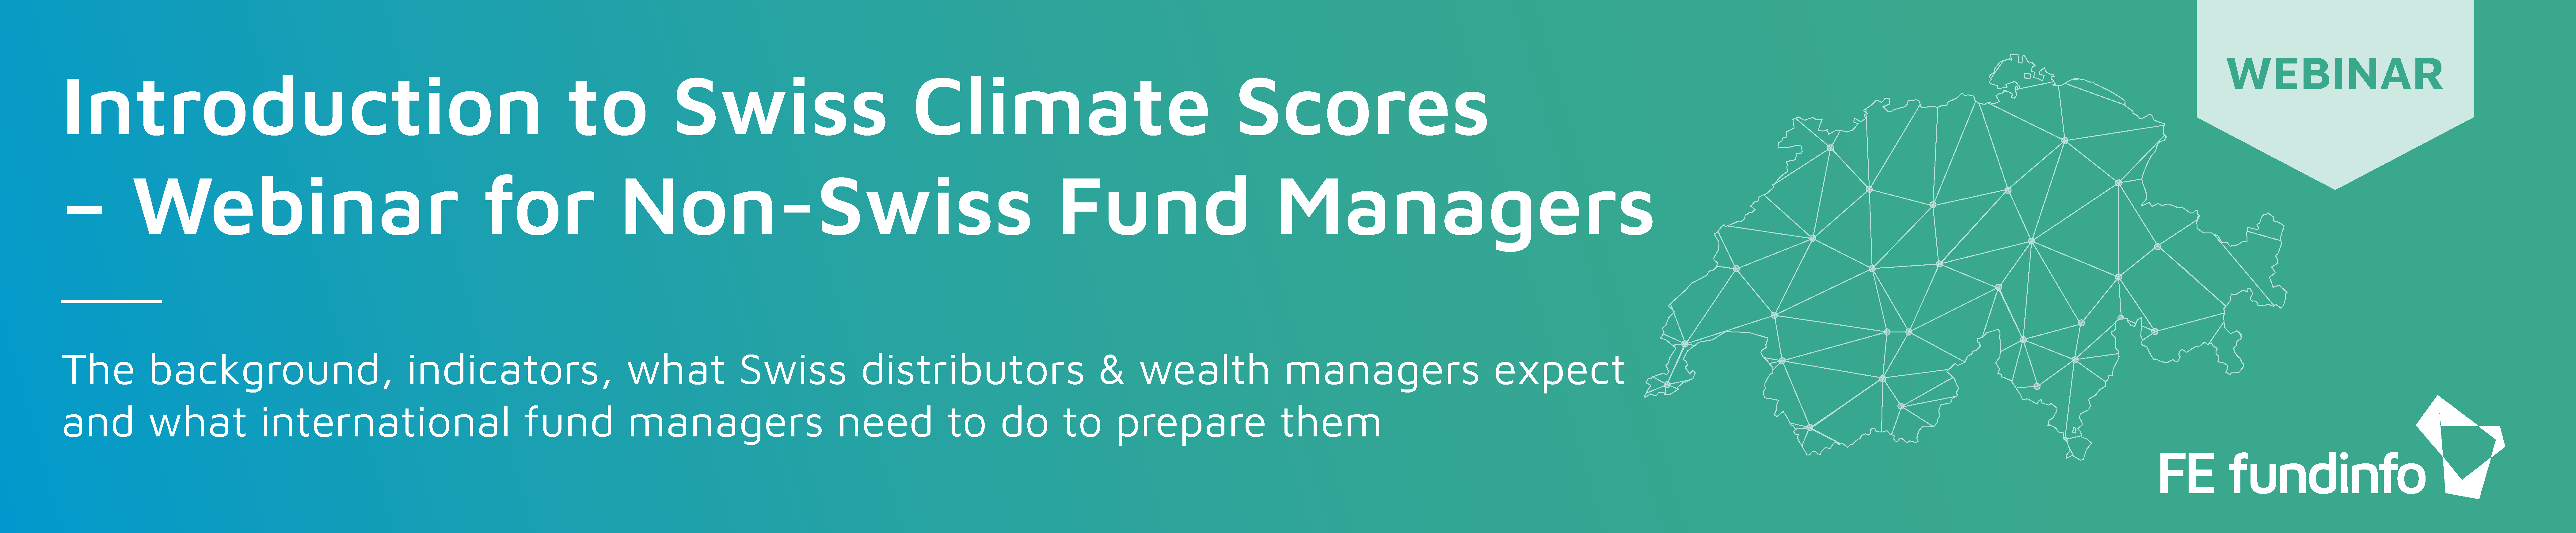 Introduction to the Swiss Climate Scores for Non-Swiss Fund Managers- Webinar